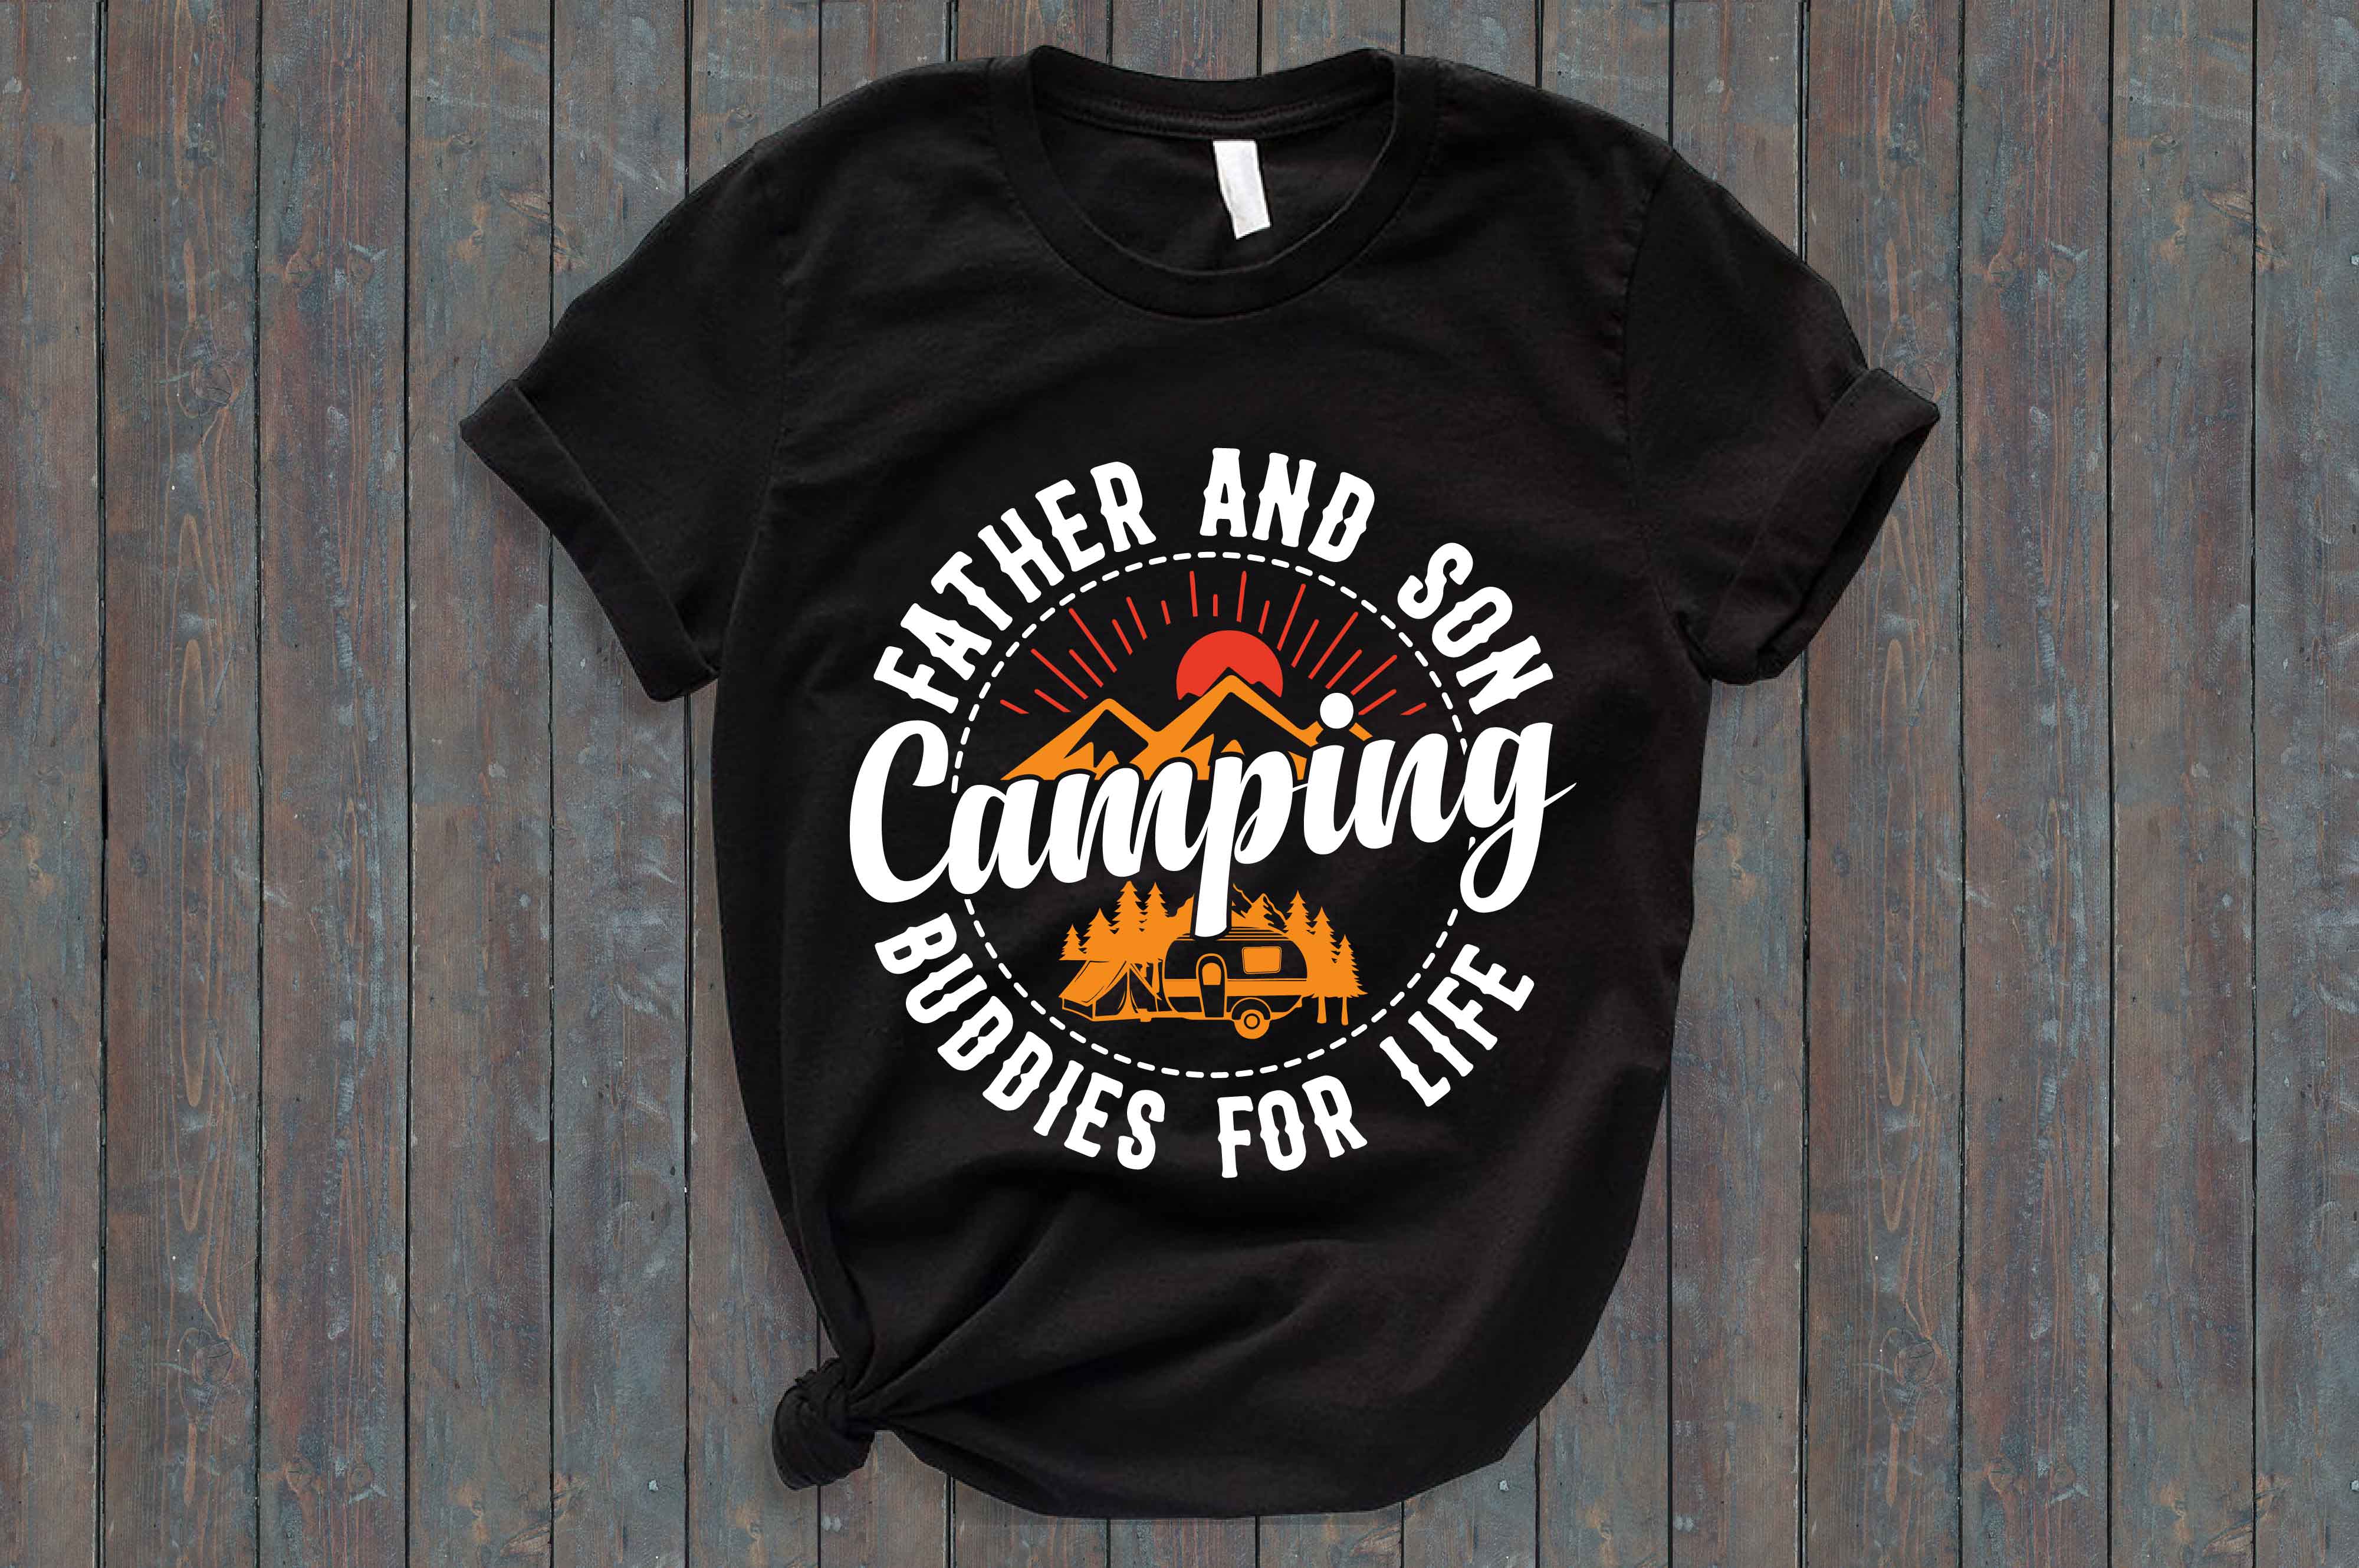 Black t - shirt with the words father and son camping printed on it.